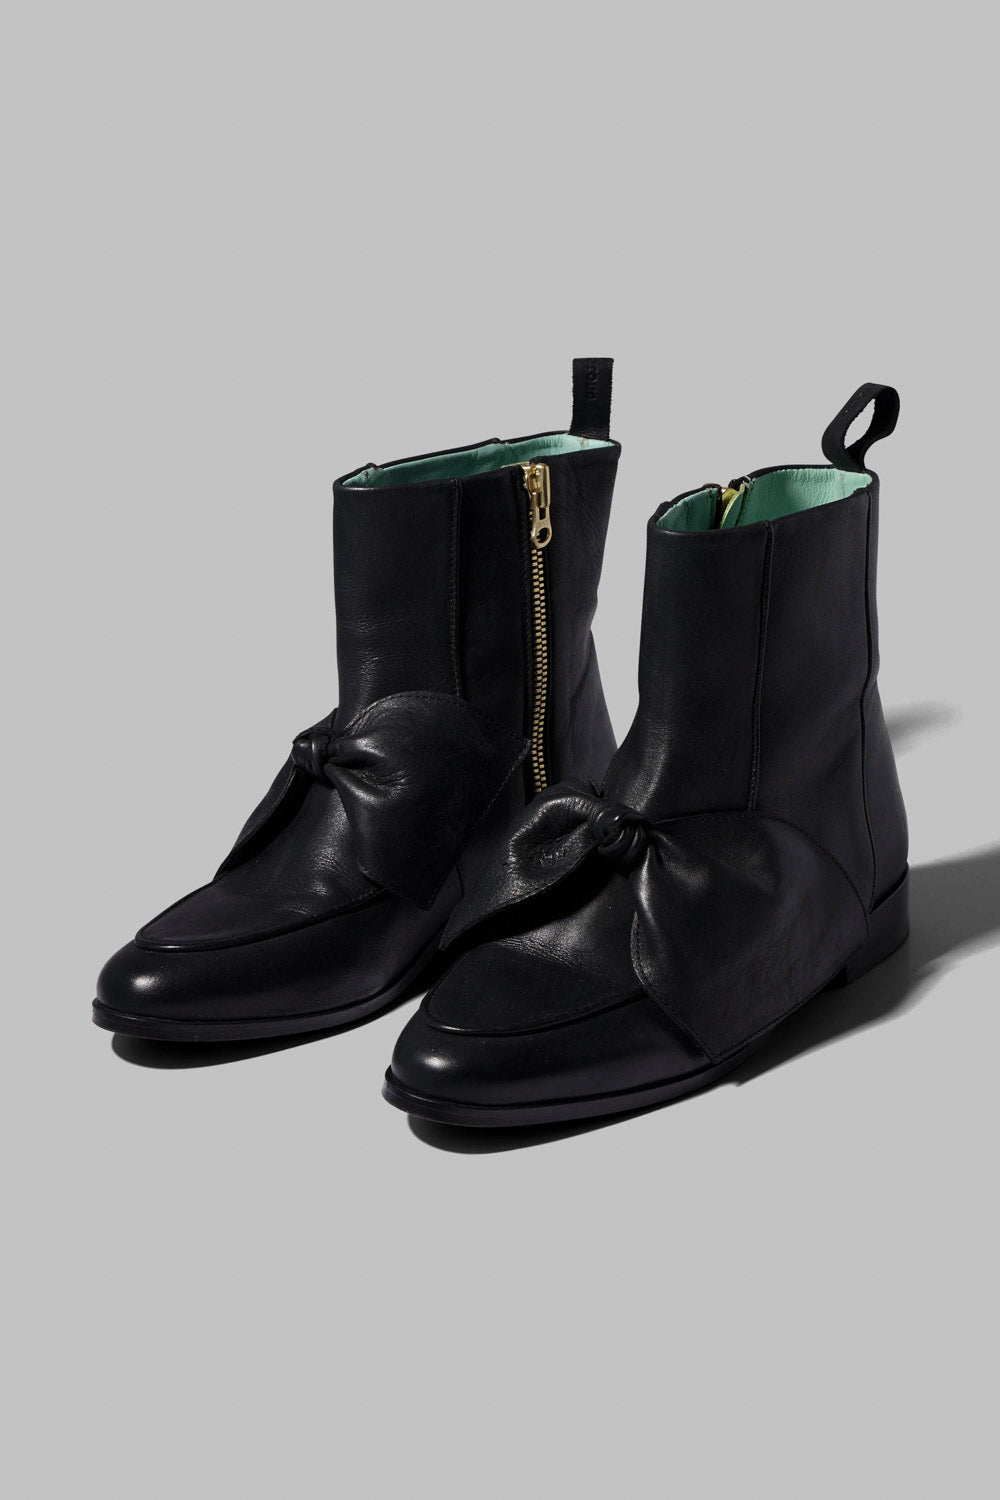 BB boots in black leather